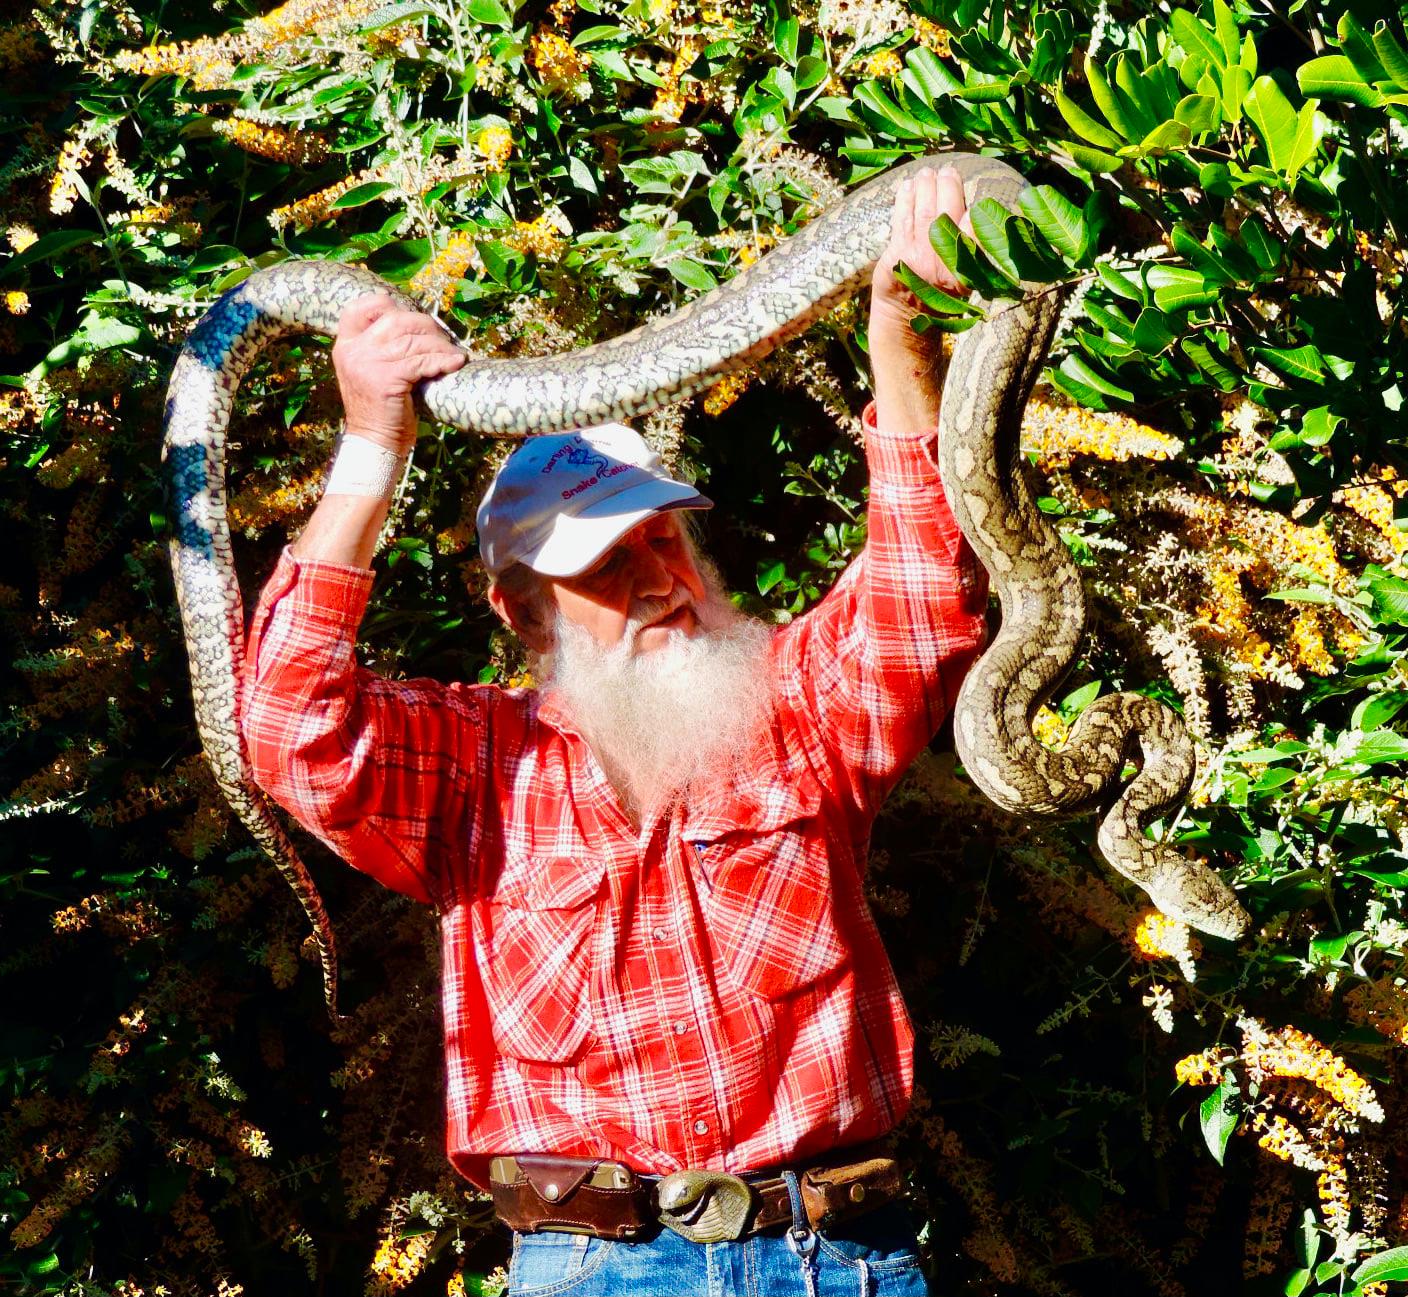 Business Listing Image for Darling Downs Snake Catchers 24/7